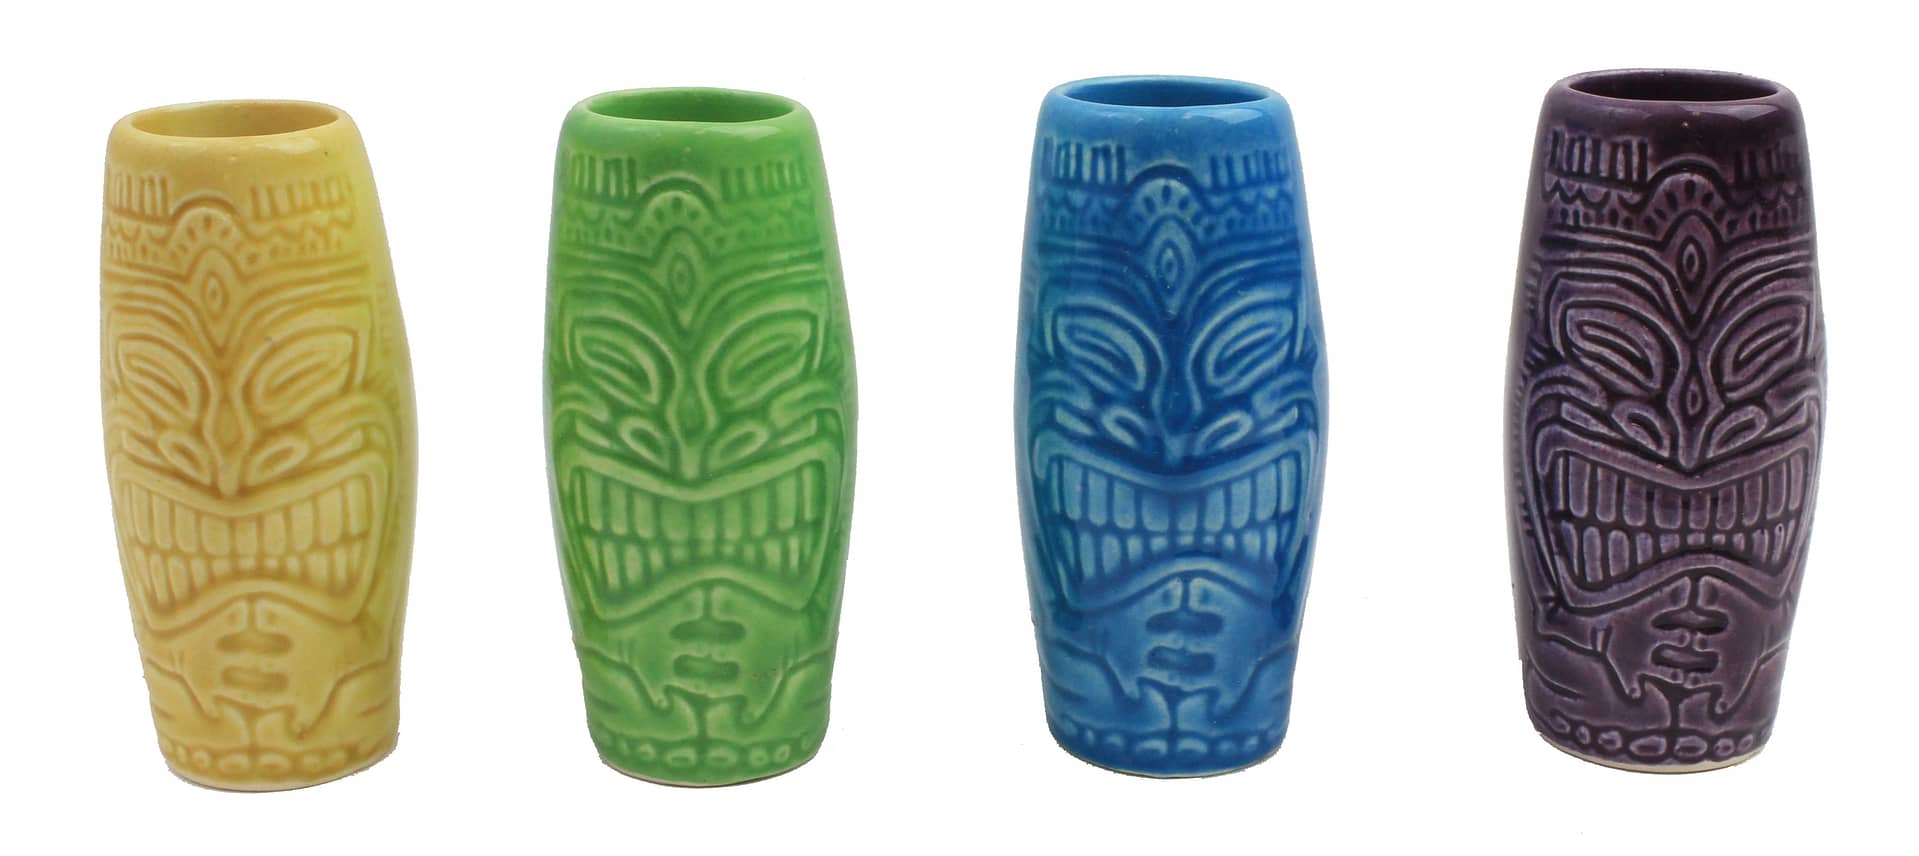 Pack of 4 Dinky Tiki Double Shot Mugs - Green, Yellow, Purple and Blue - 2 oz each